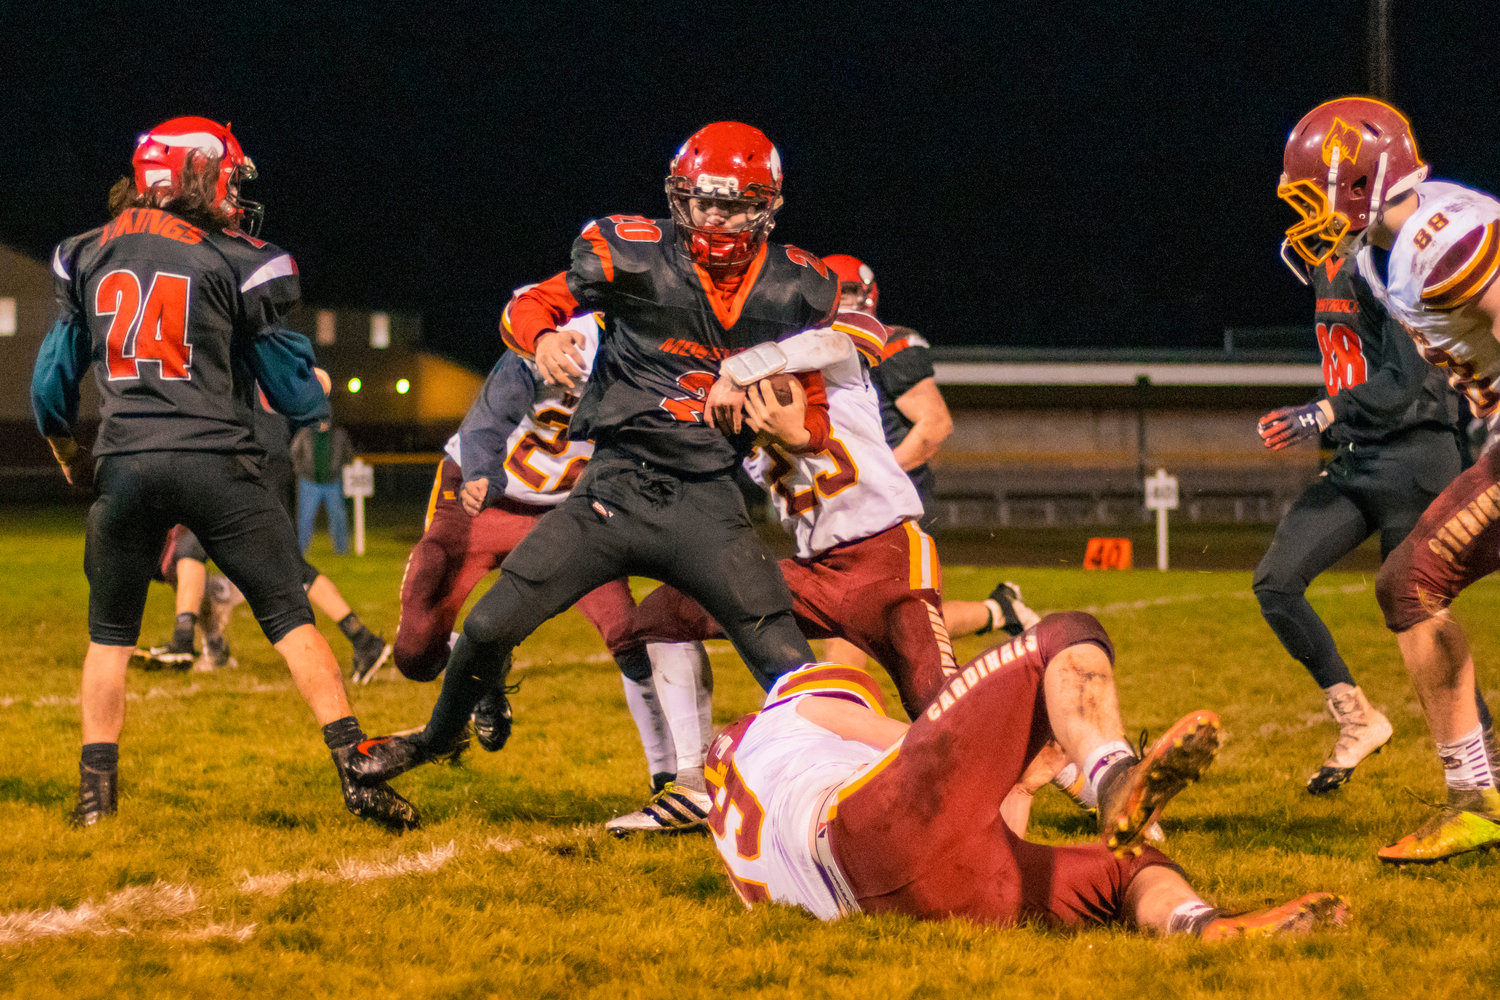 Vikings’ Matteo Mendoza (20) fights for extra yardage during a game against the Cardinals Friday night in Mossyrock.